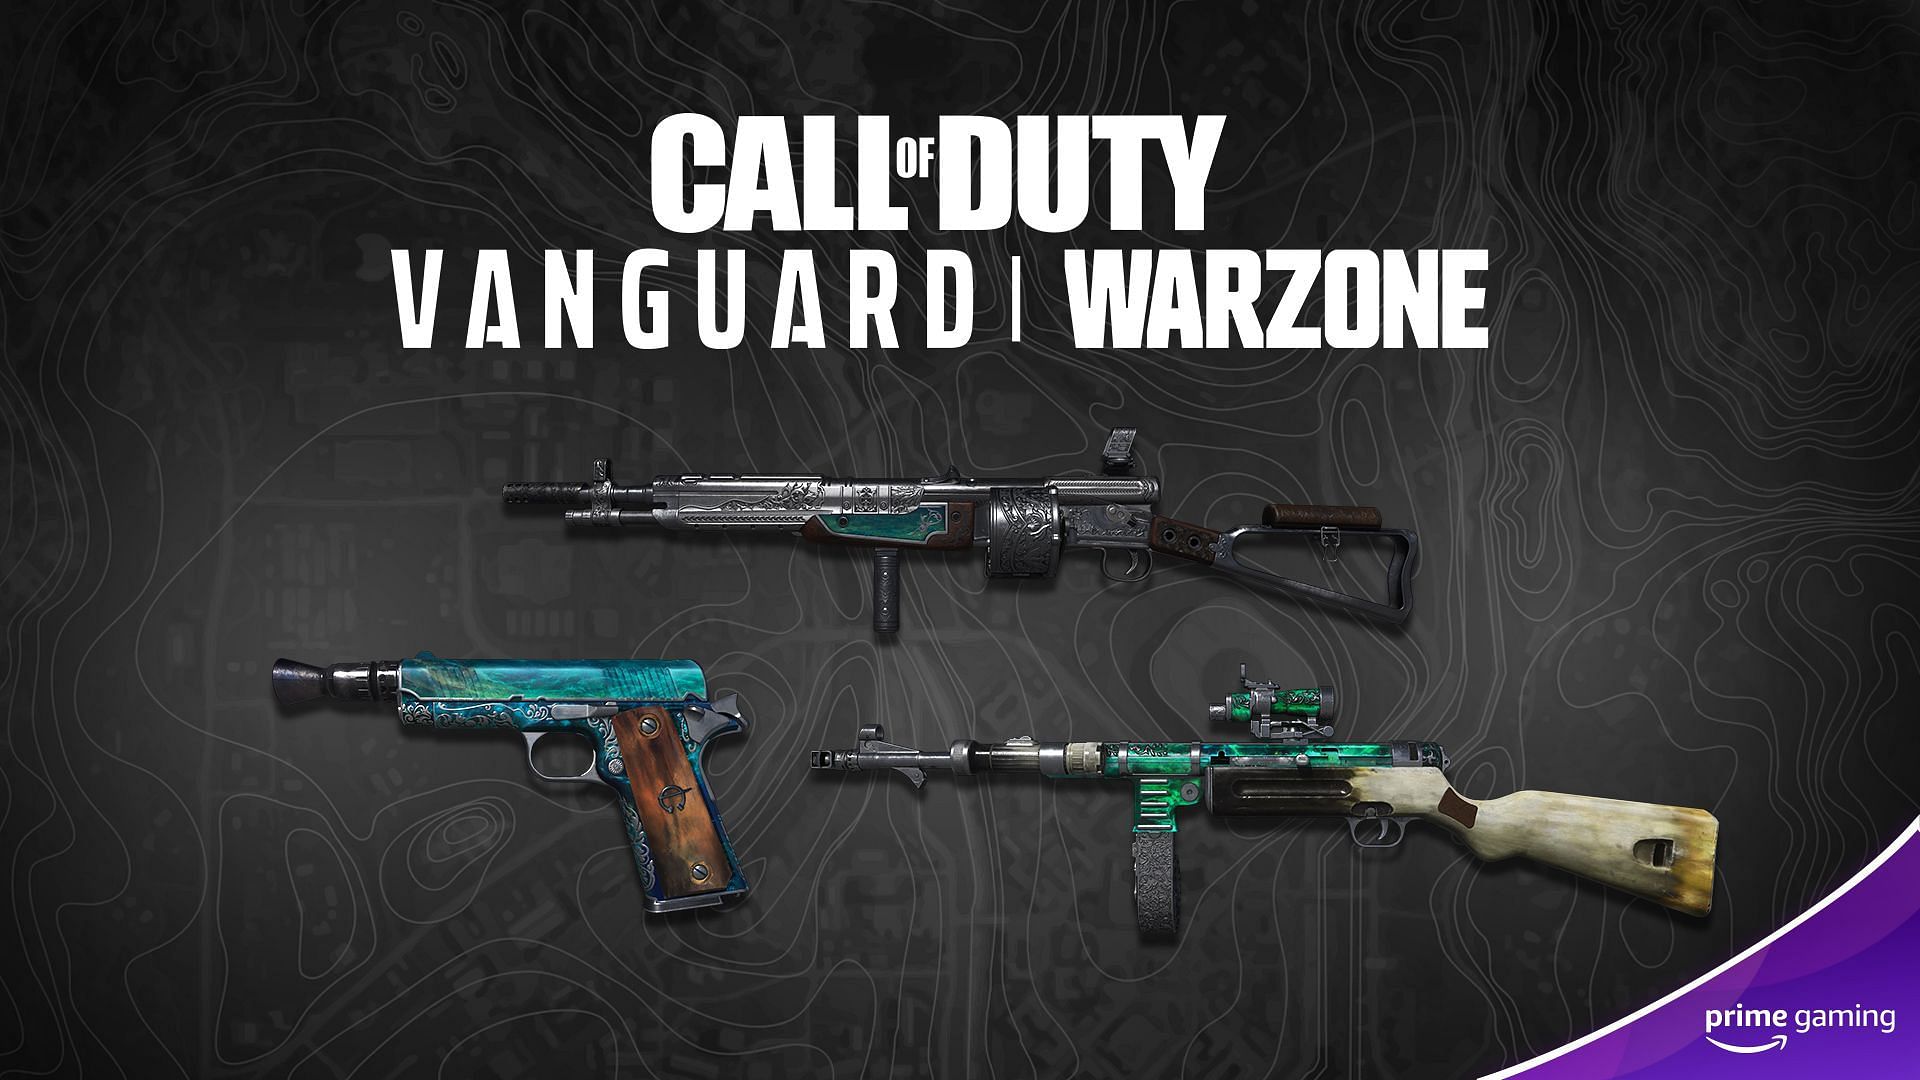 Latest Prime Gaming bundle of Call of Duty Warzone and Vanguard (Image via Activision)